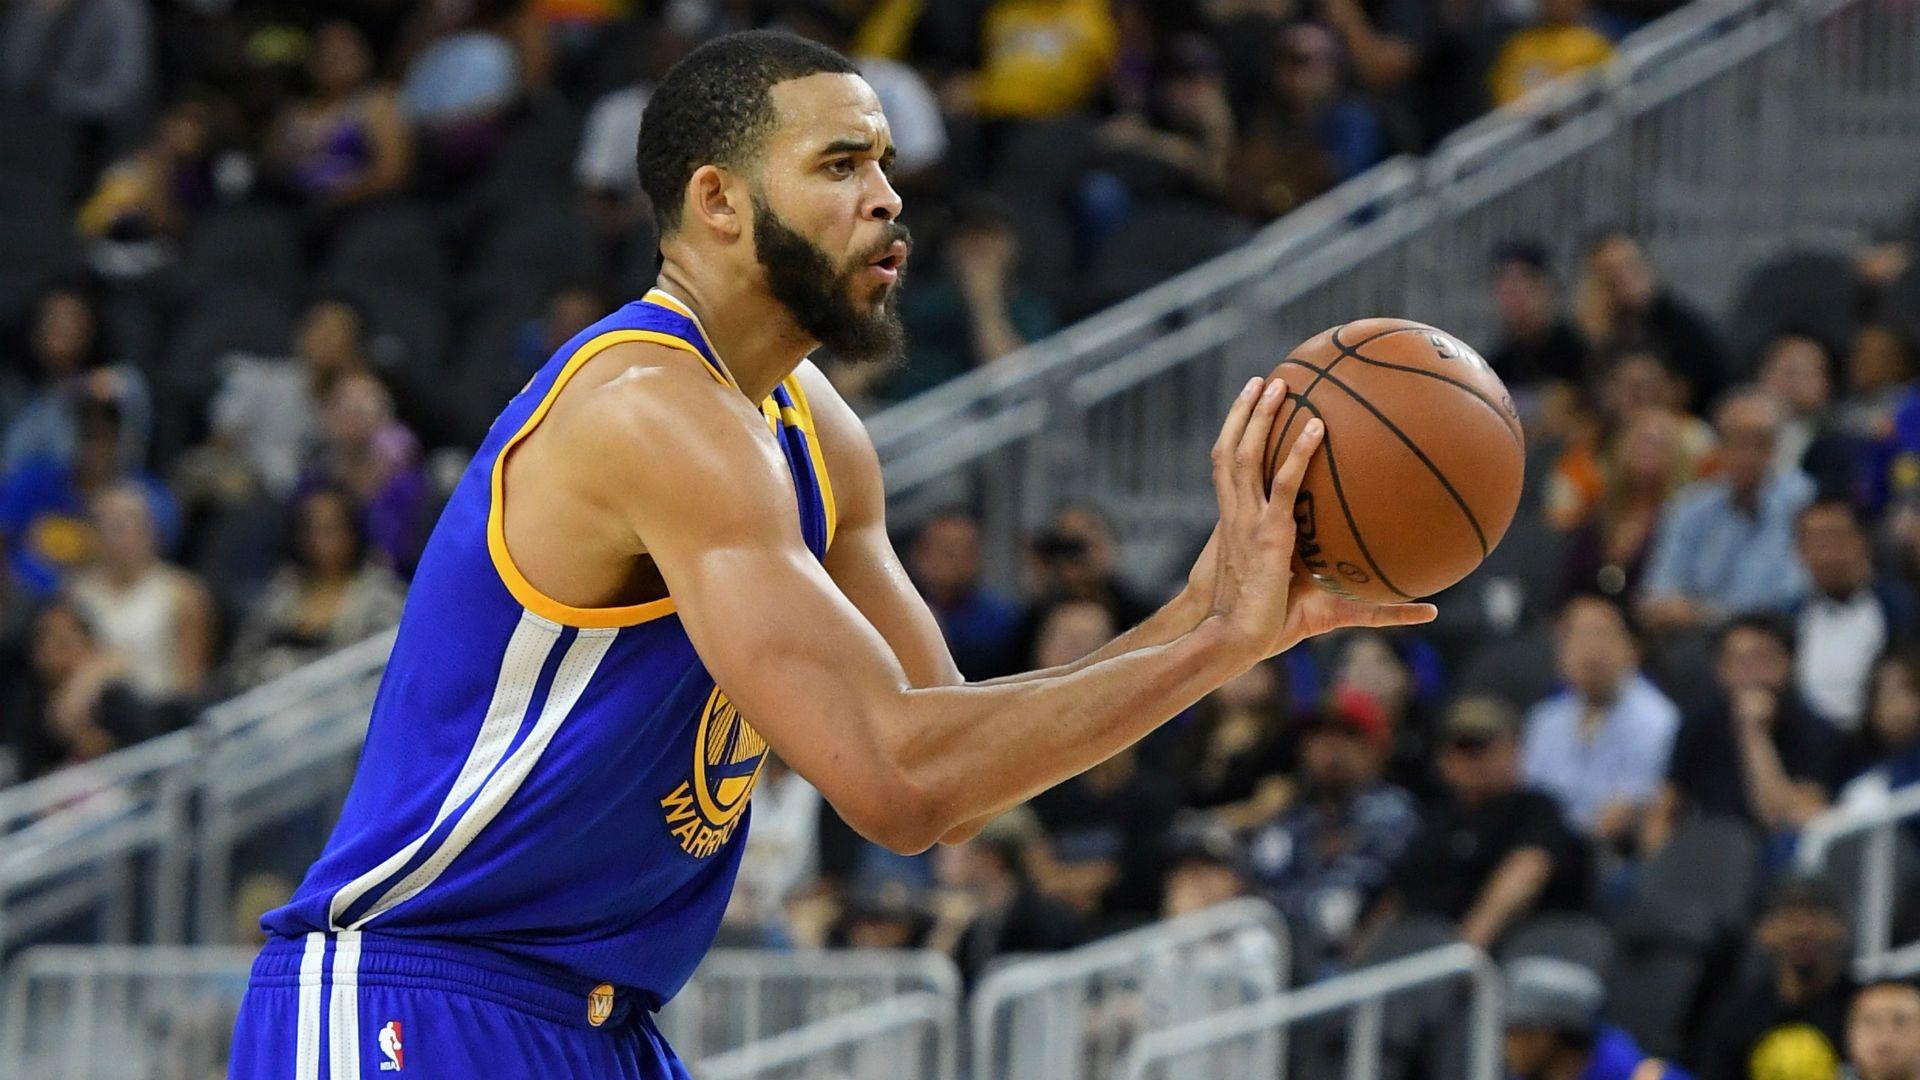 Warriors' JaVale McGee celebrates playoff berth bybecoming a